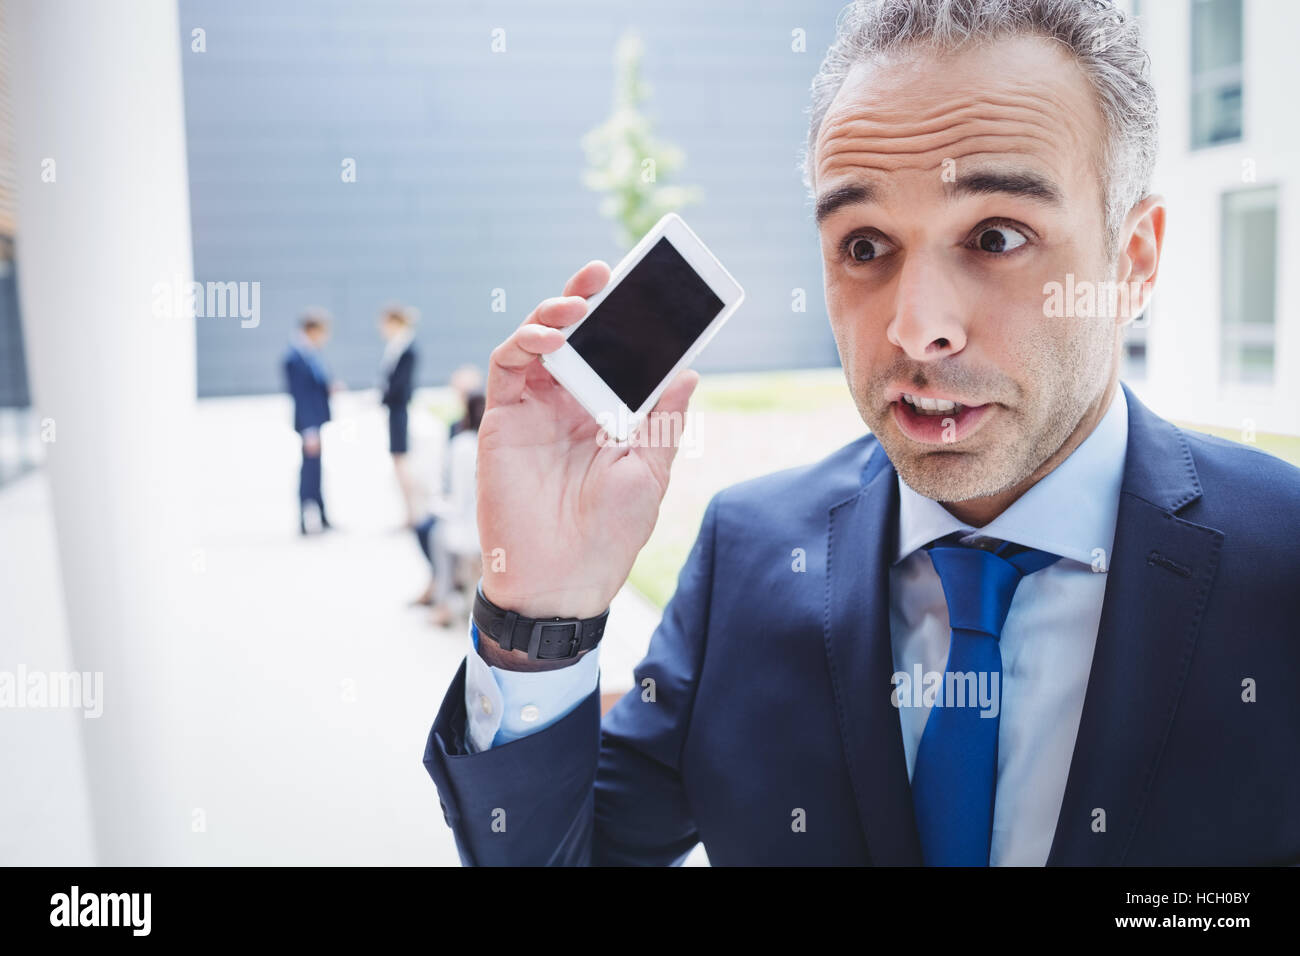 Businessman holding mobile phone and frowning Stock Photo